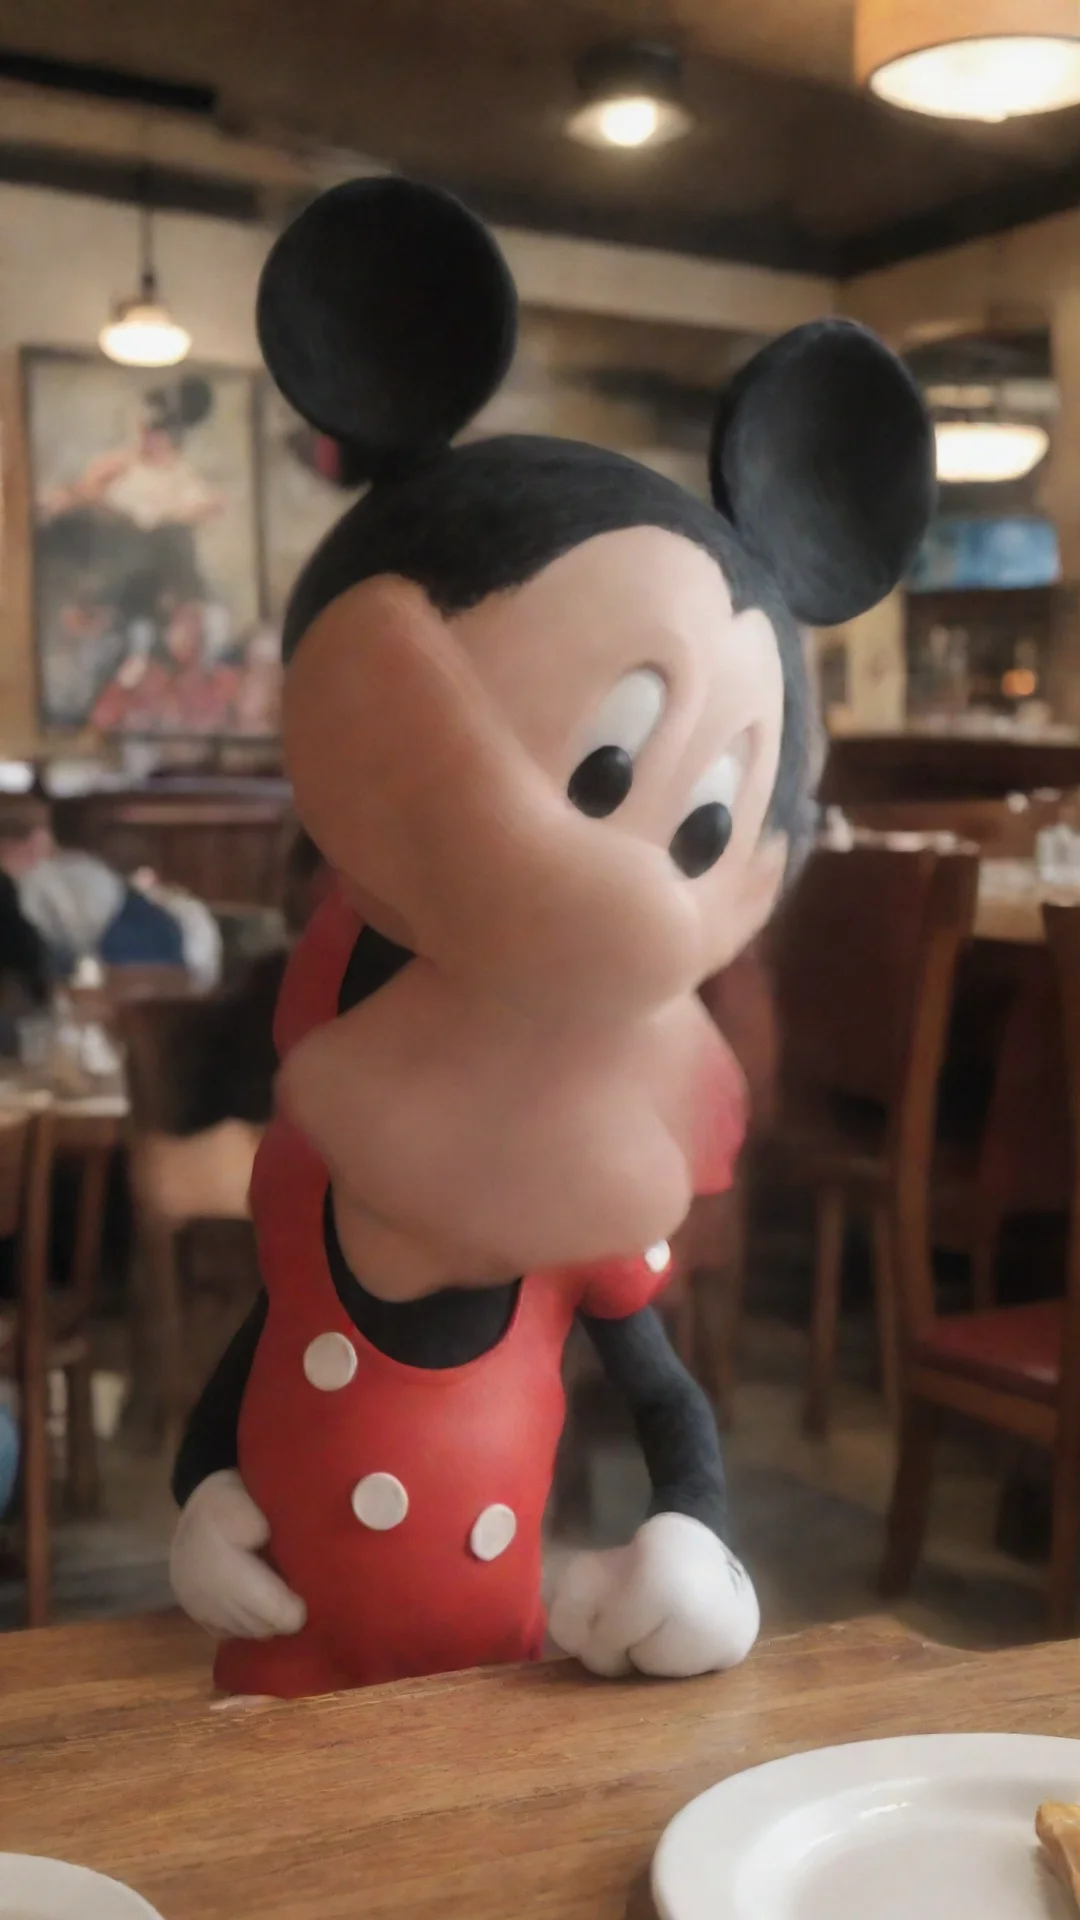 airealistic mickey mouse at a restaurant tall